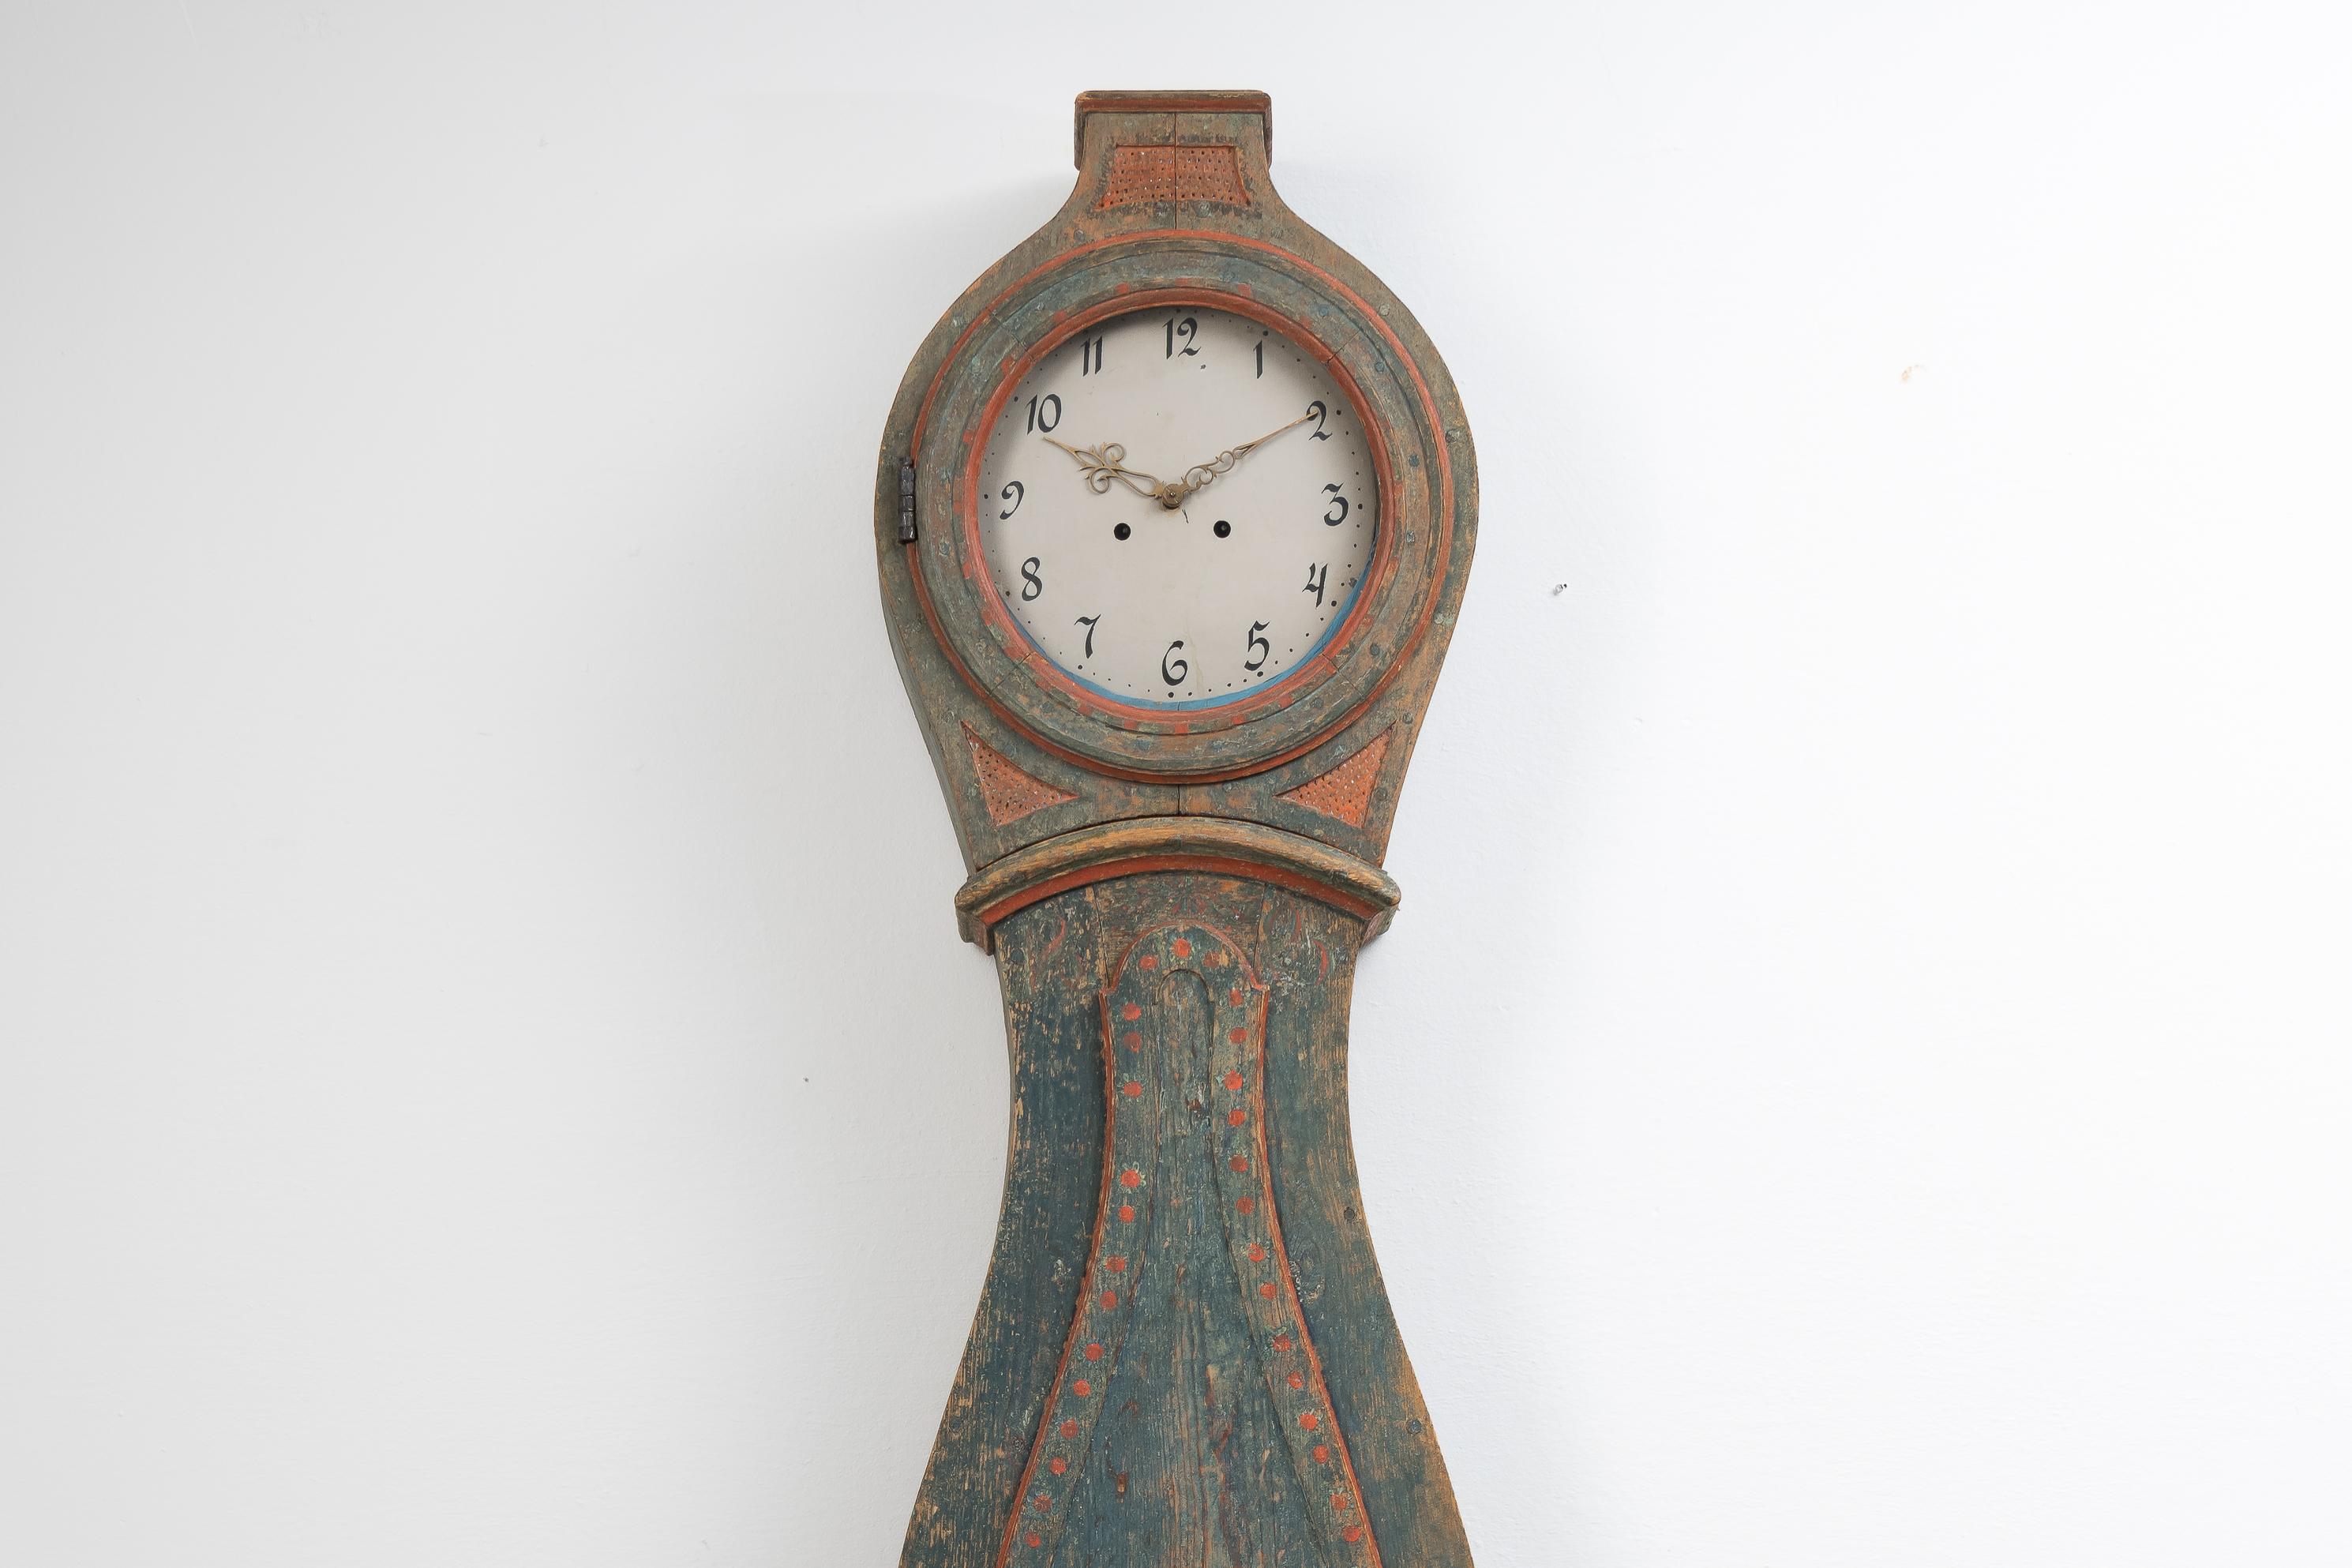 Genuine Swedish long case clock from Hälsingland. The clock is genuine and honest with a traditionally hand-made case with a rococo shape. Made in Swedish pine with the original blue green paint and red decoration paint. The long case clock, also